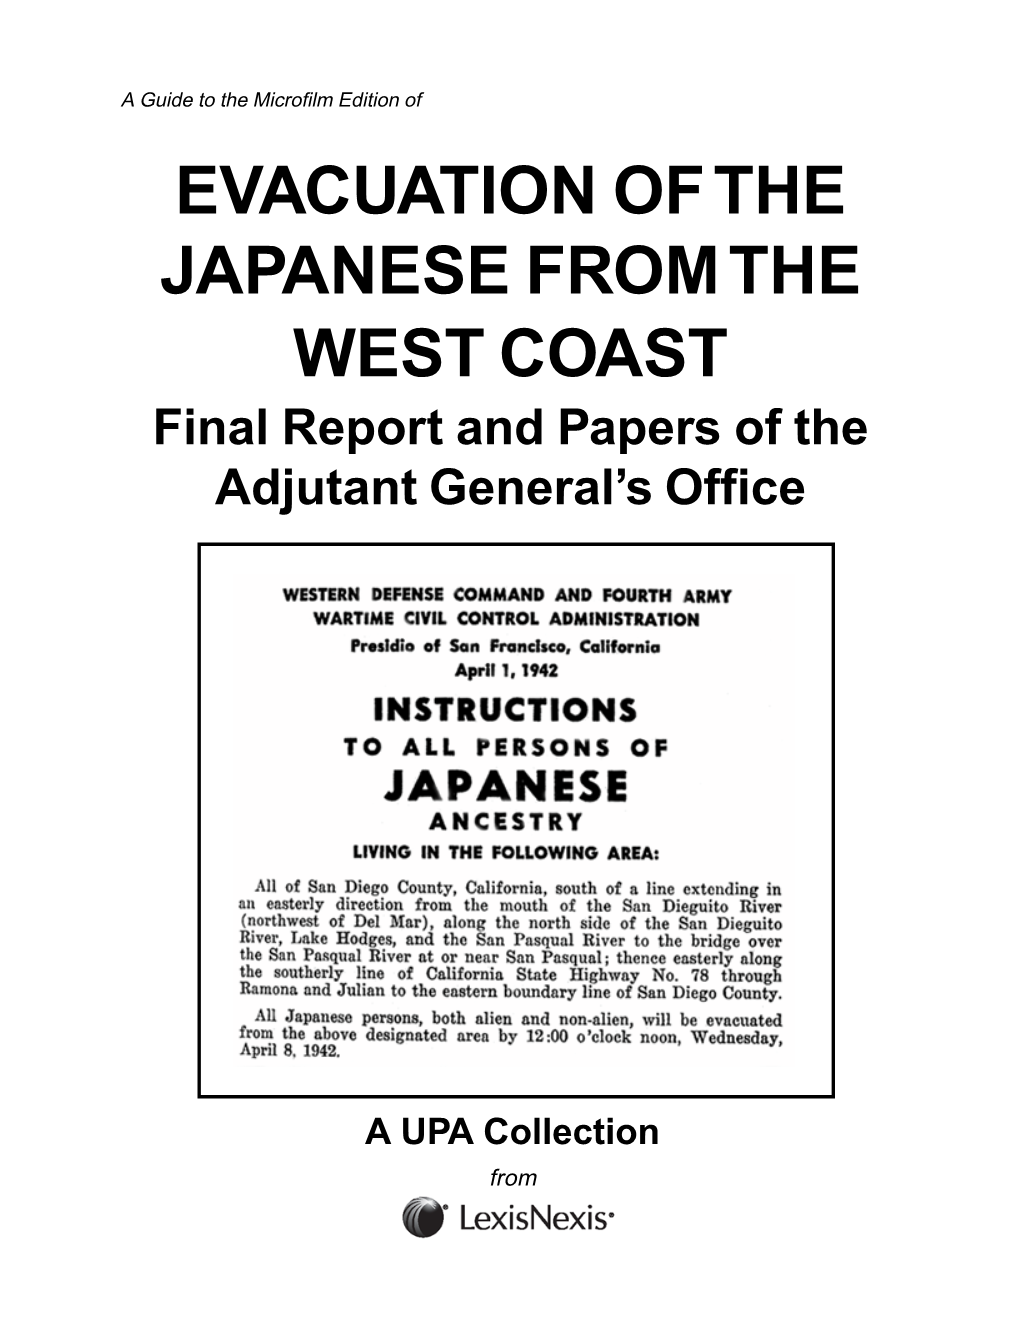 EVACUATION of the JAPANESE from the WEST COAST Final Report and Papers of the Adjutant General’S Office